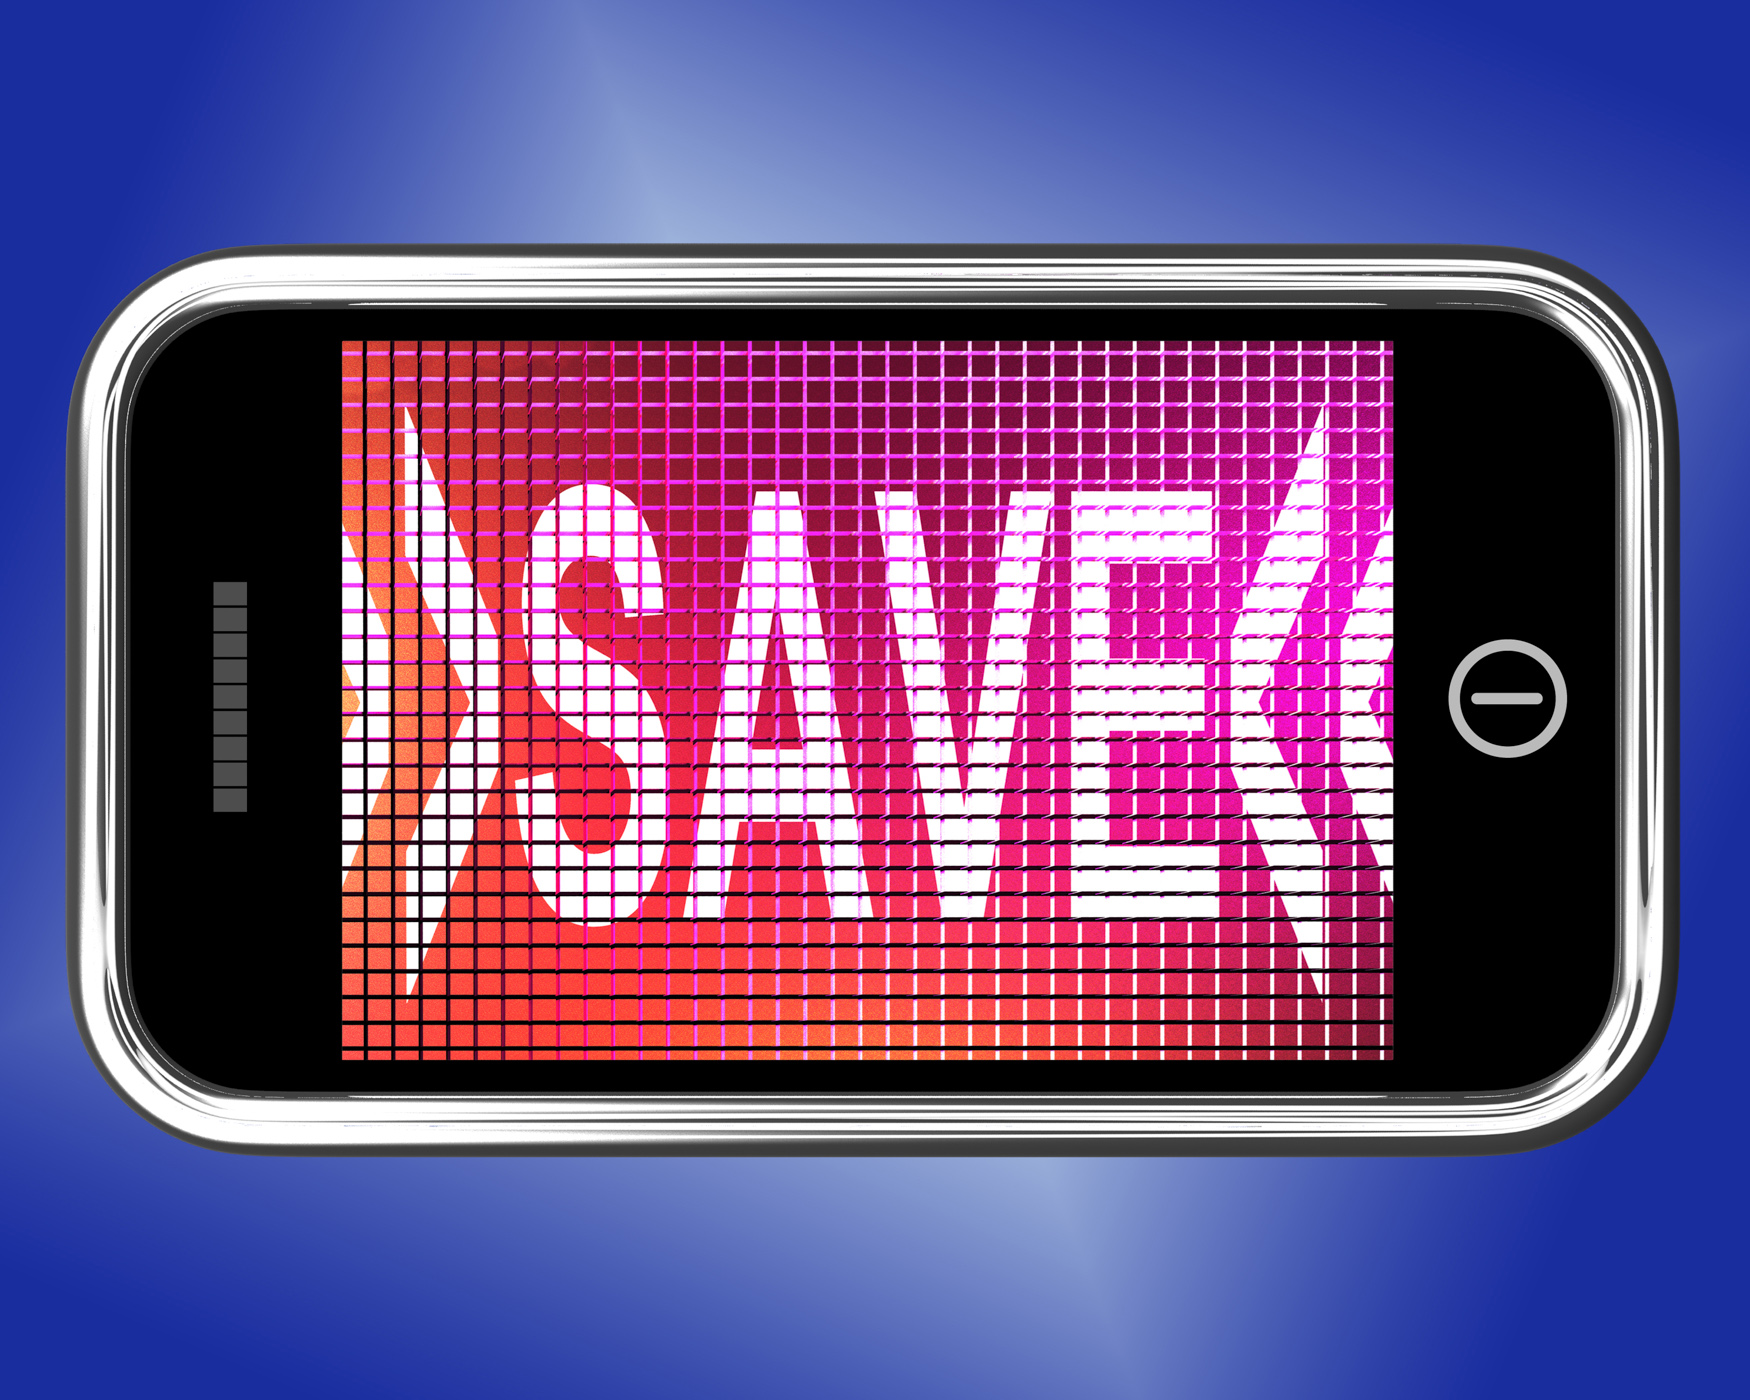 Save message on mobile phone shows promotion photo